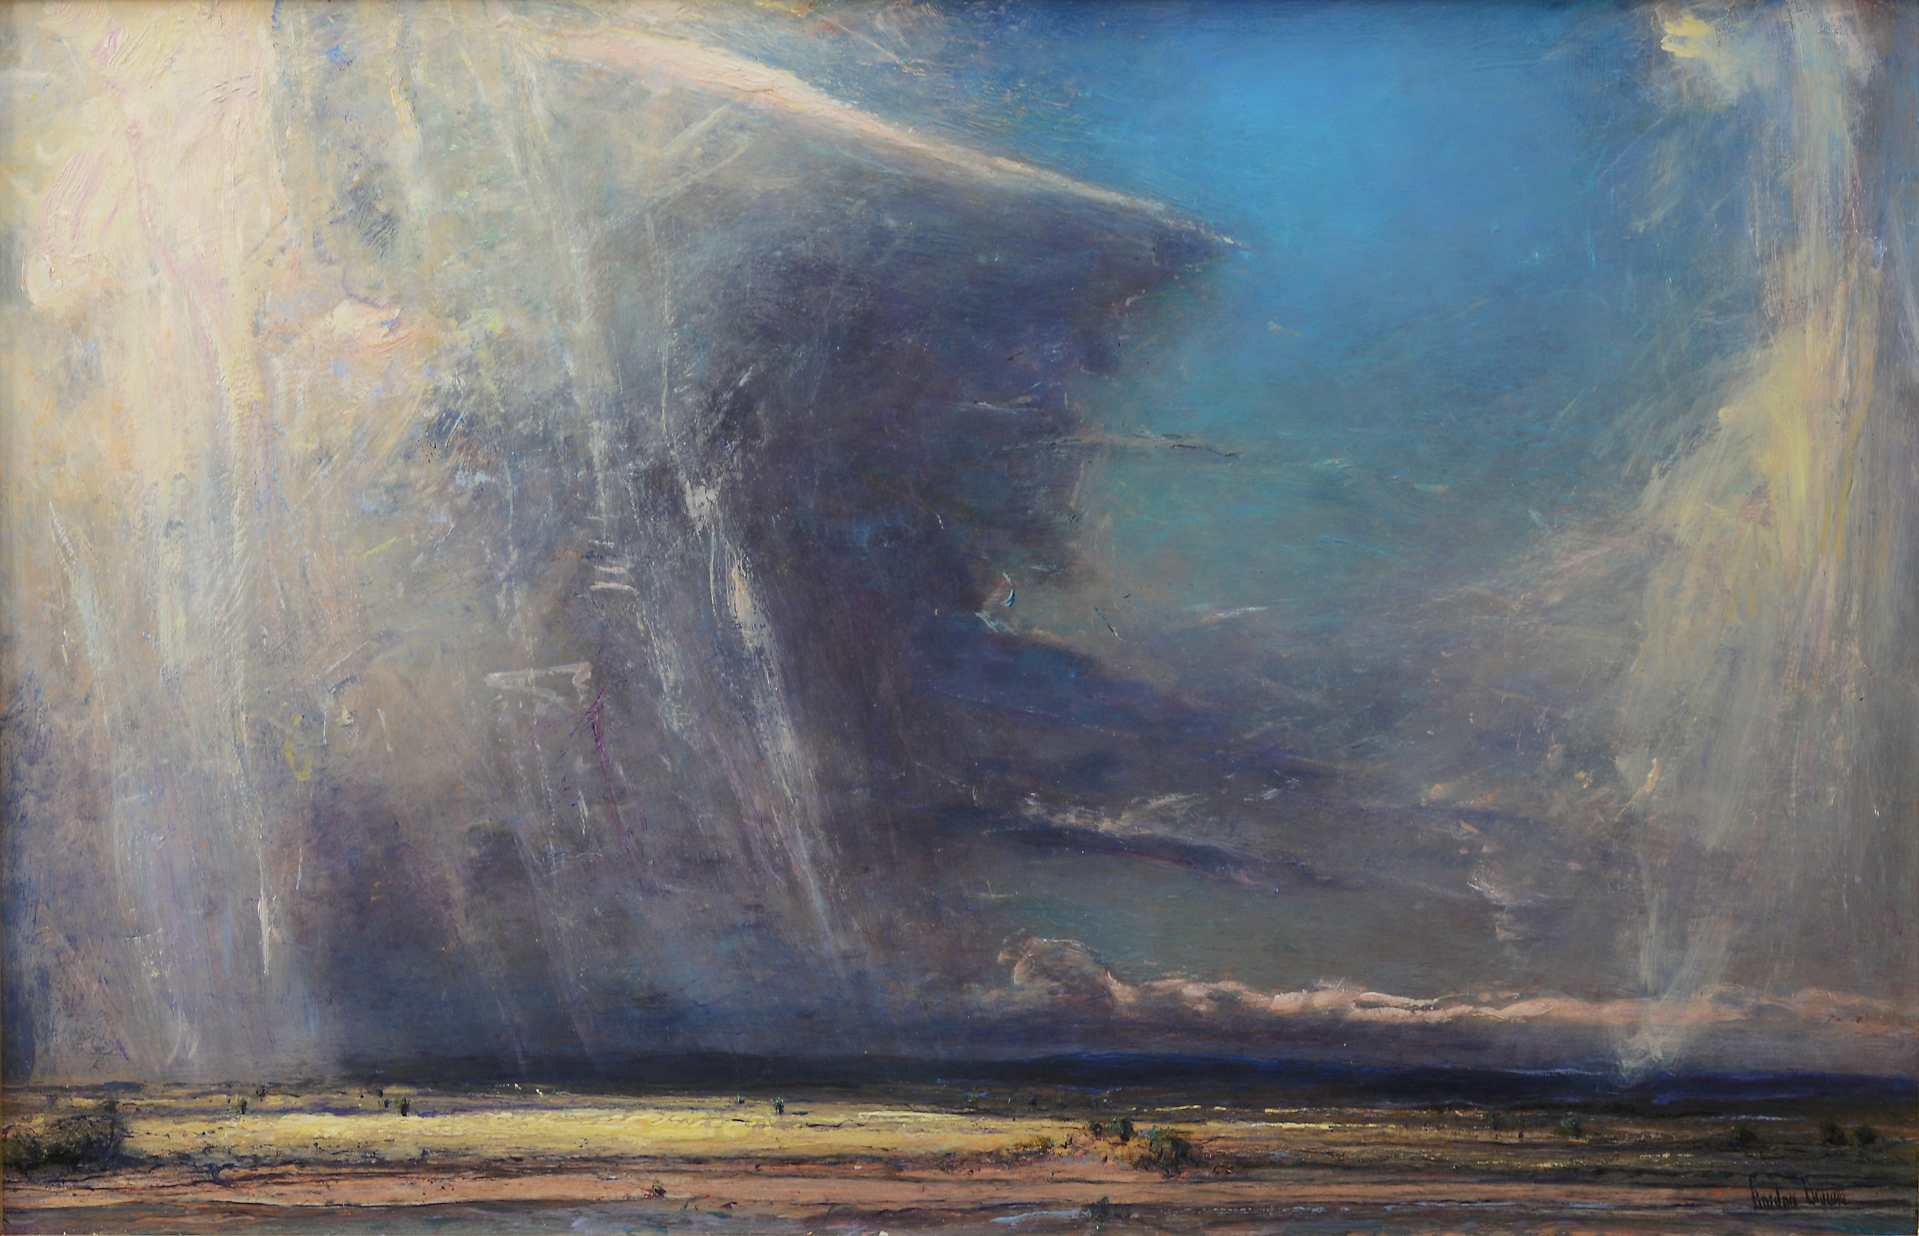 The Edge of the Storm by Gordon Brown